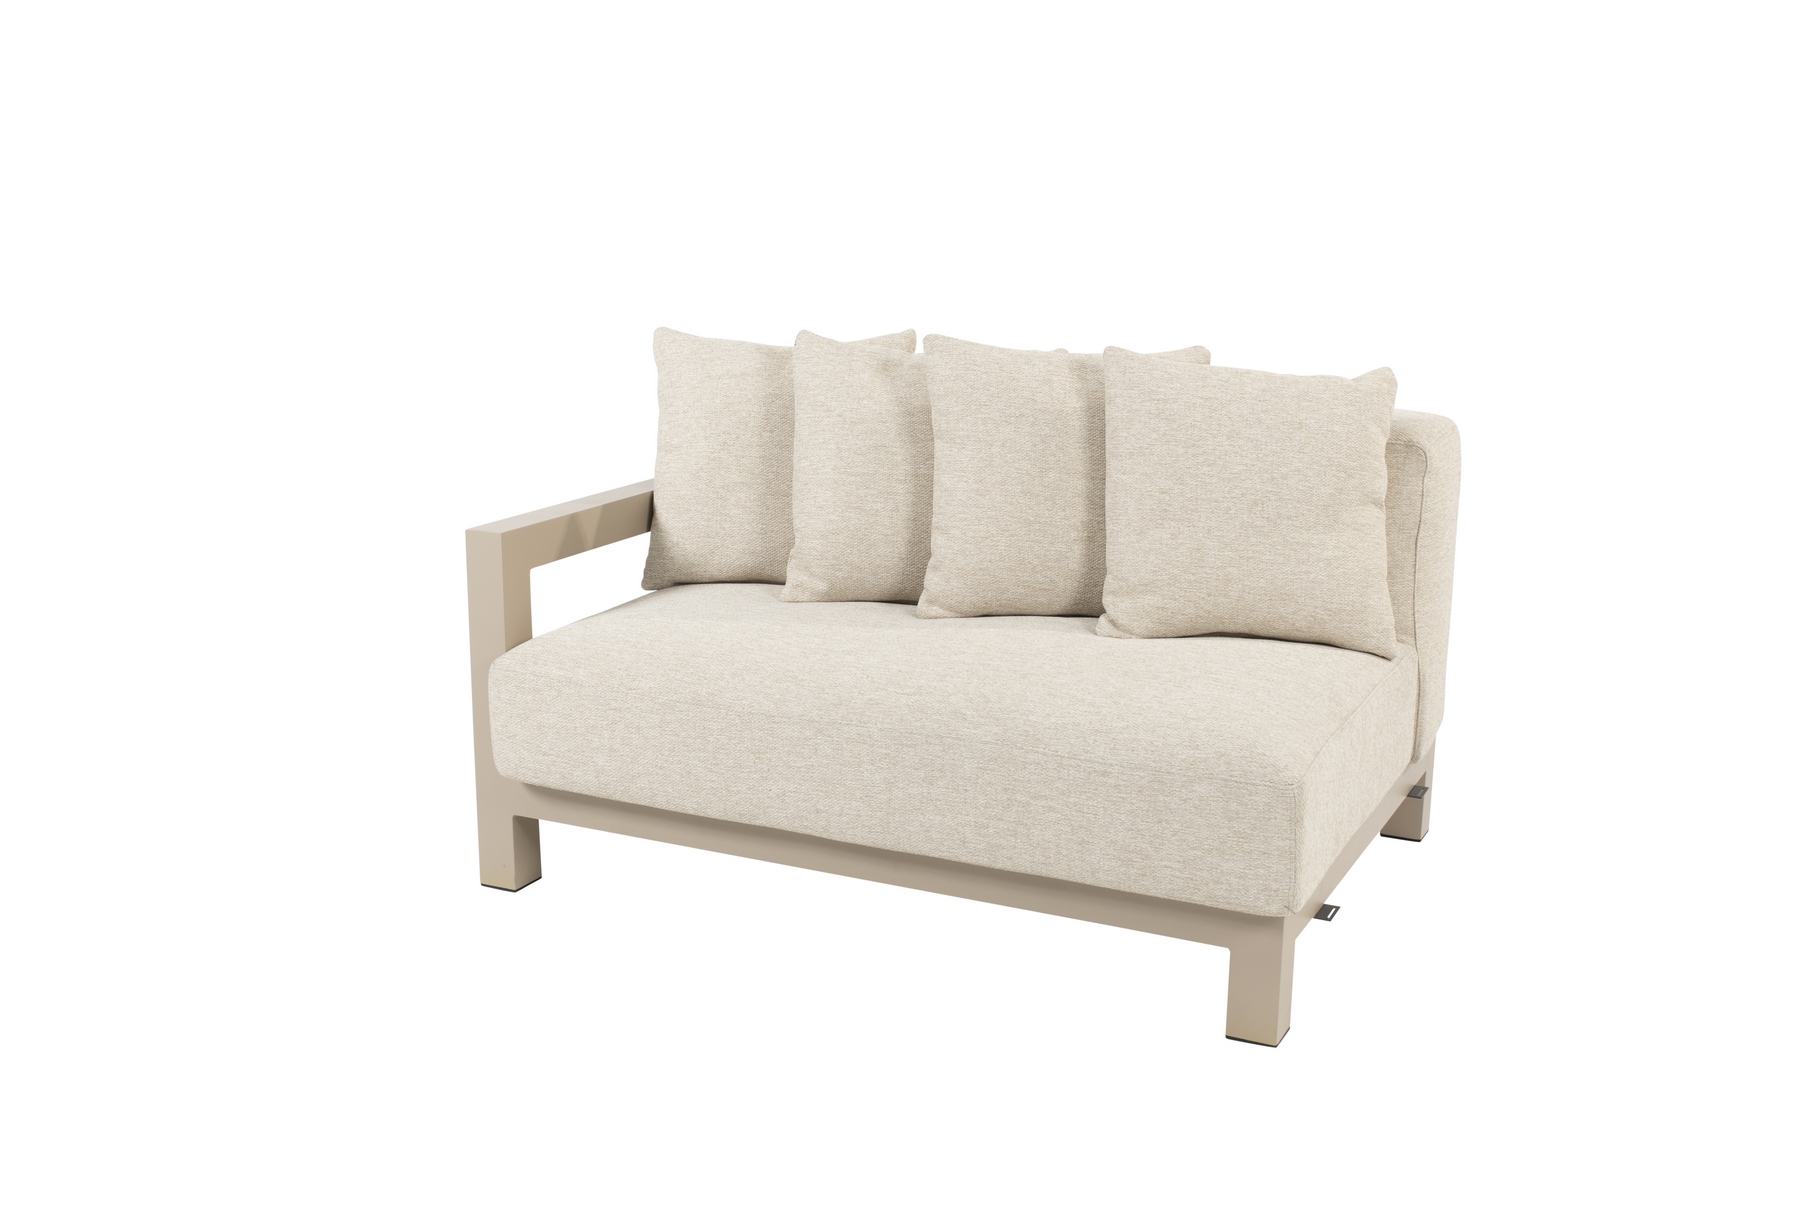 19870__Raffinato_living_bench_1_5_seater_right_latte_with_6_cushions_01.jpg